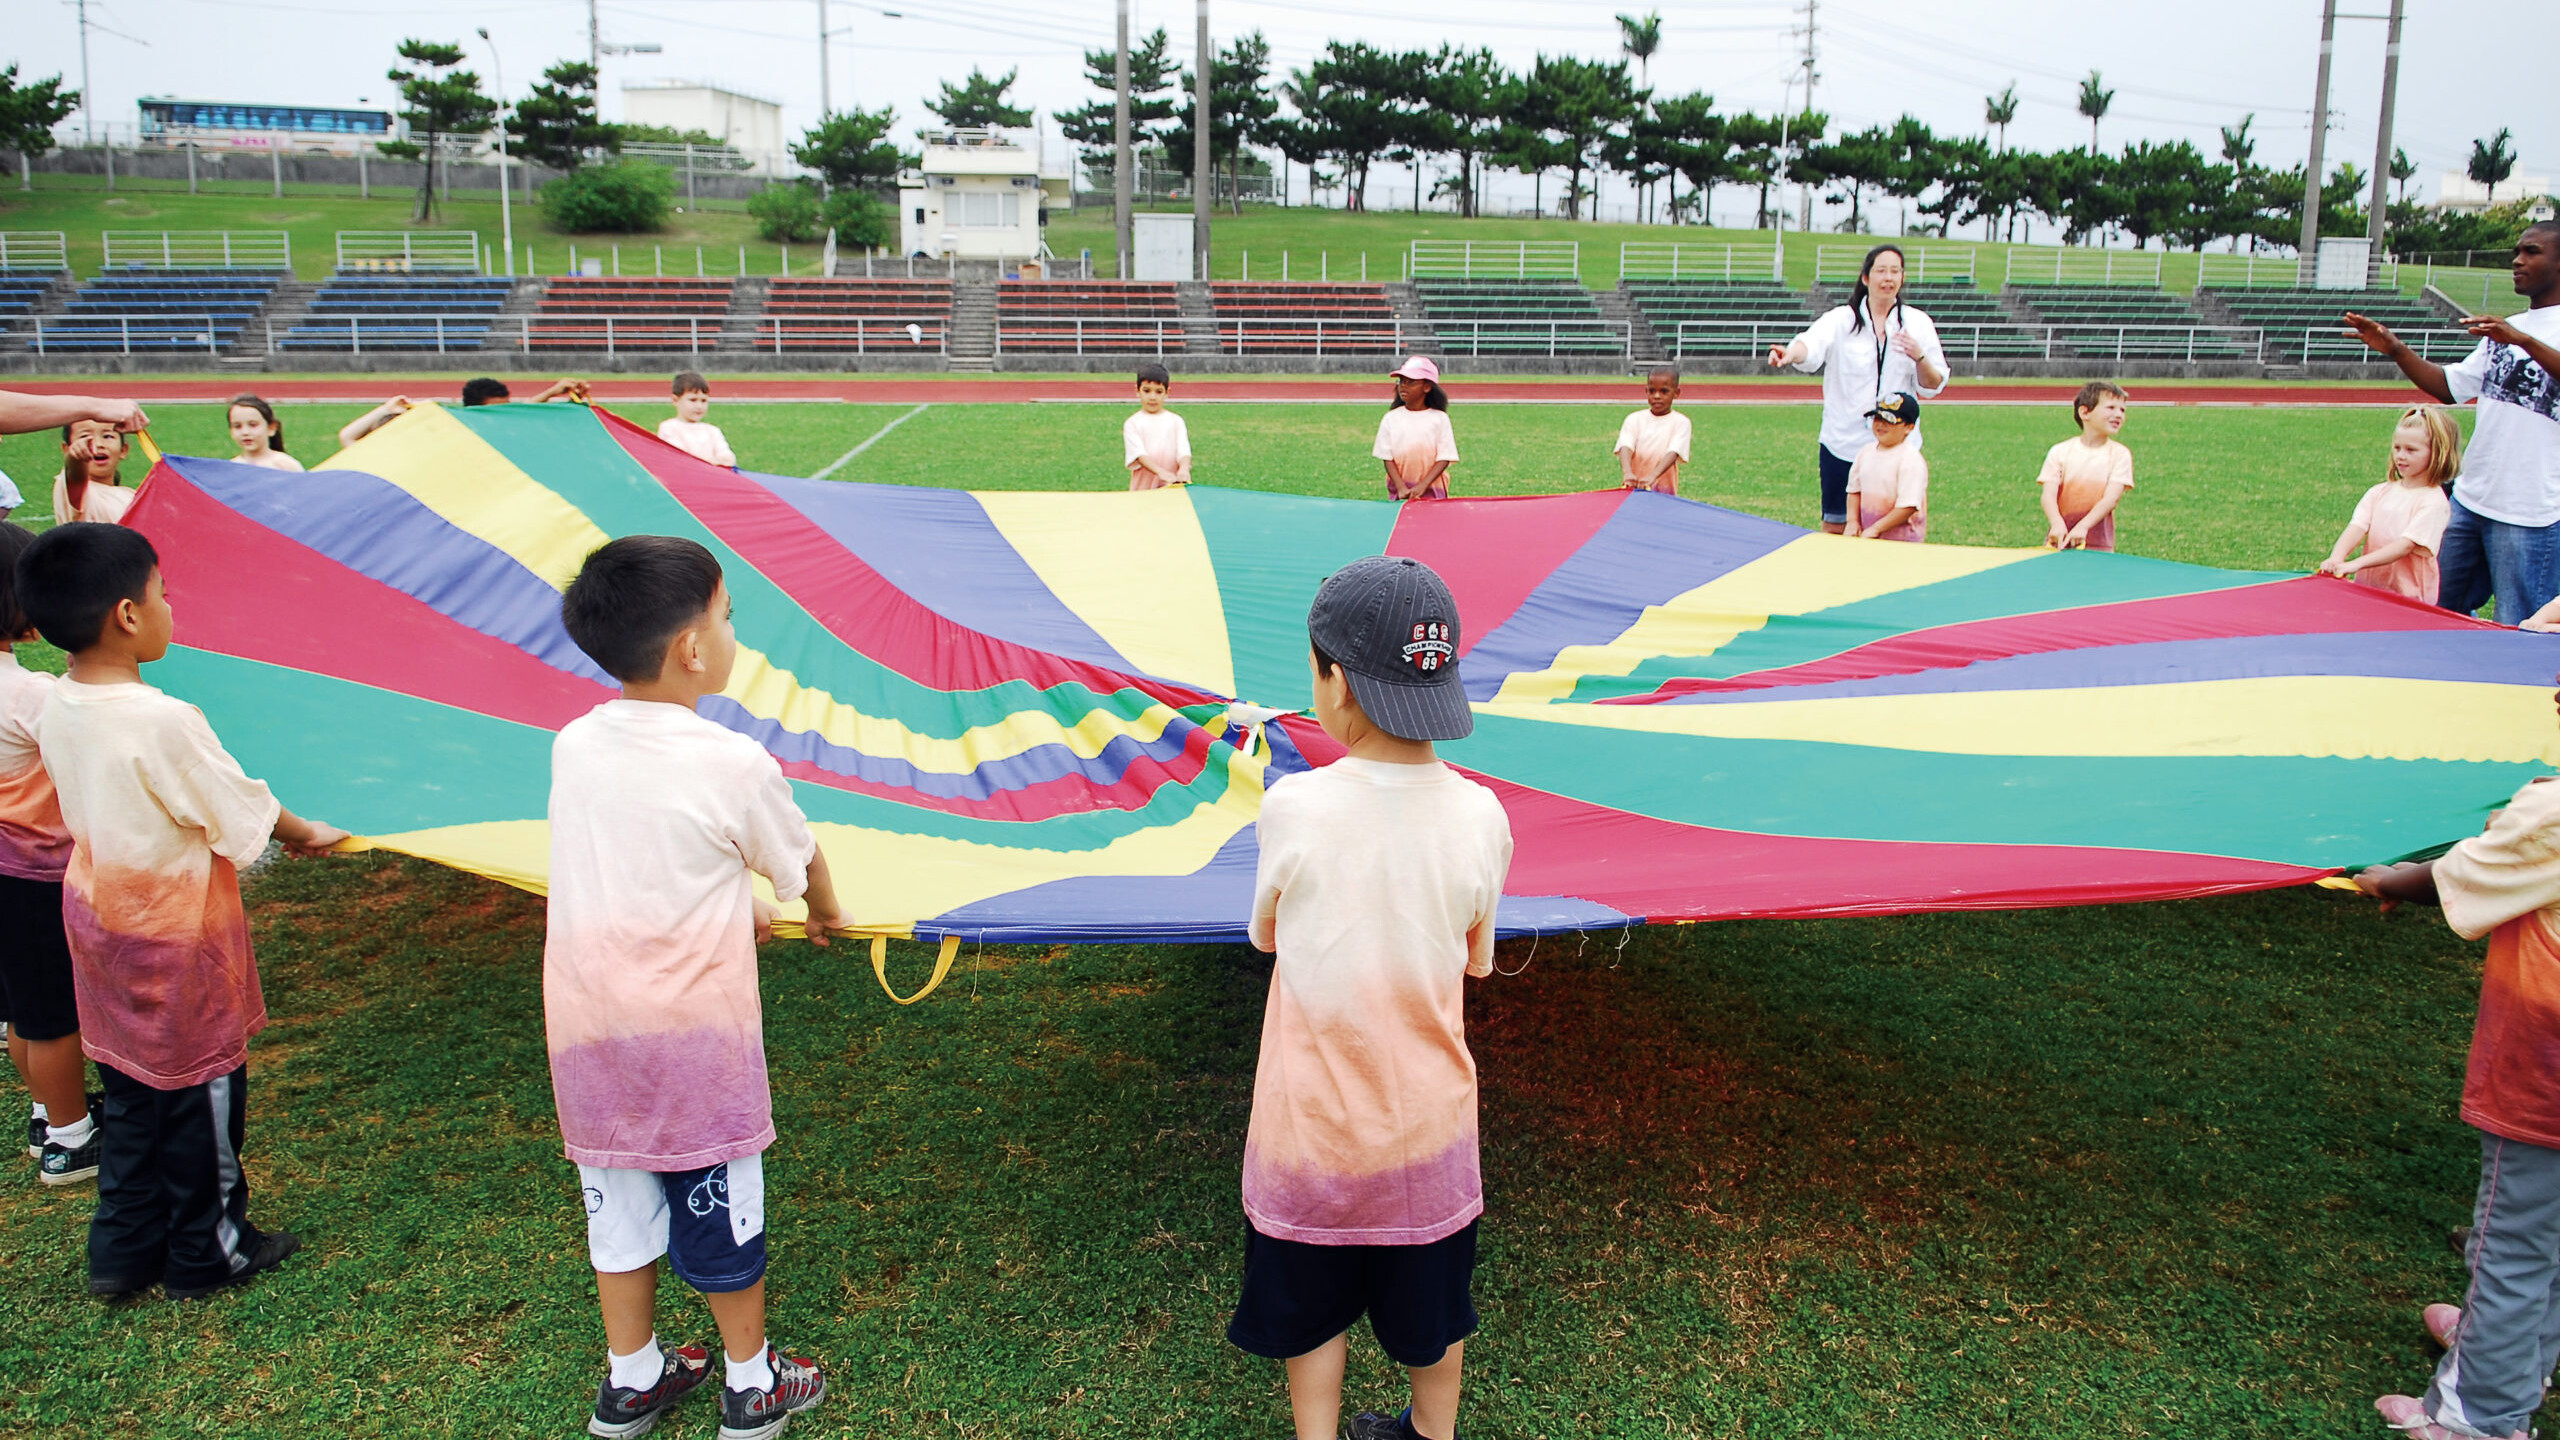 Little kids holding a circular and colorful parachute with handles in a football field having fun for a school field day.